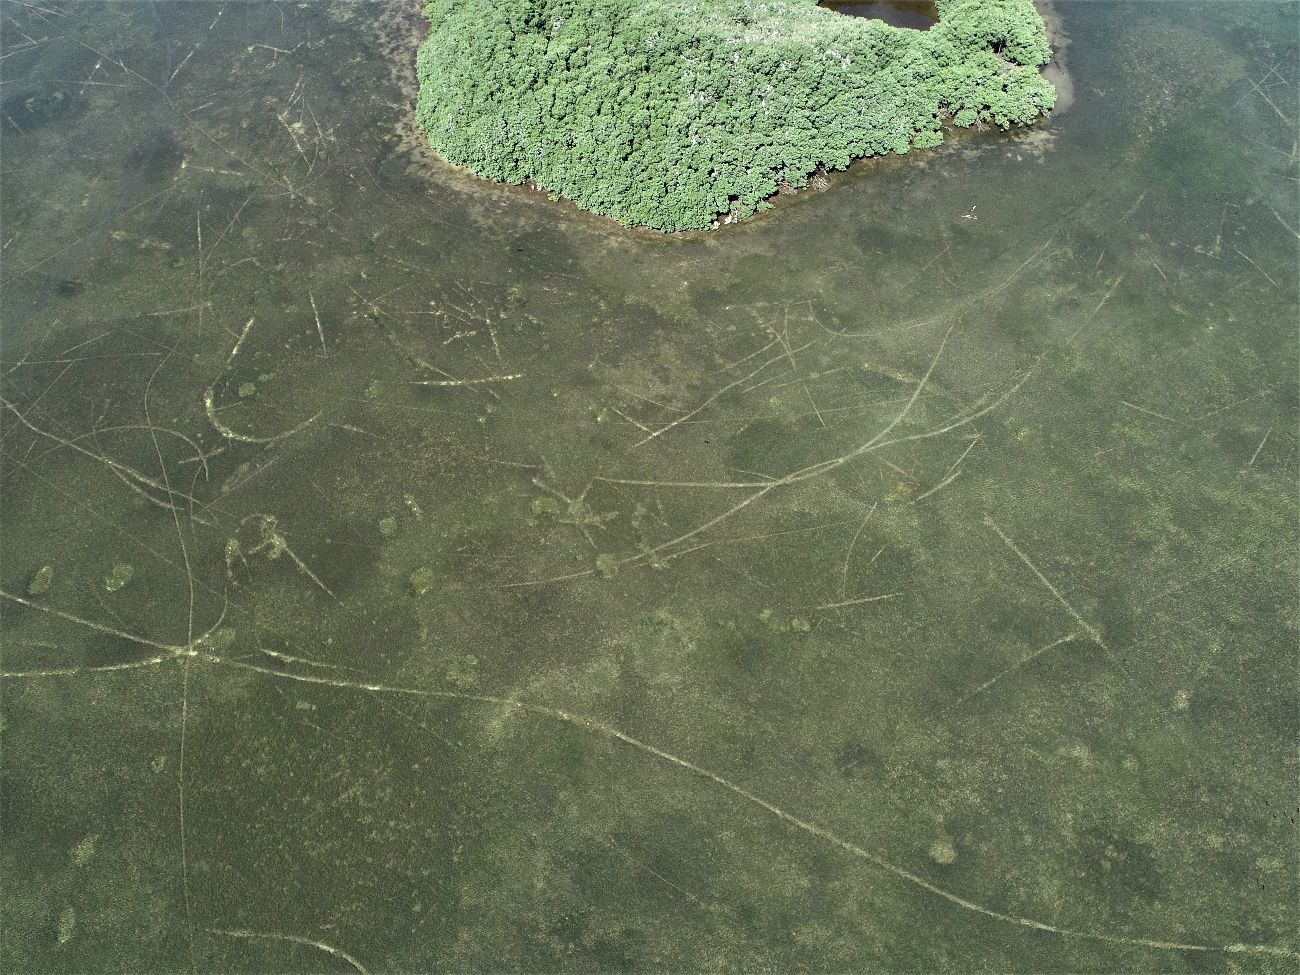 Prop scars that damage the sea grass are visible as lighter lines off of an island popular with recreational anglers in the SMMAP. 